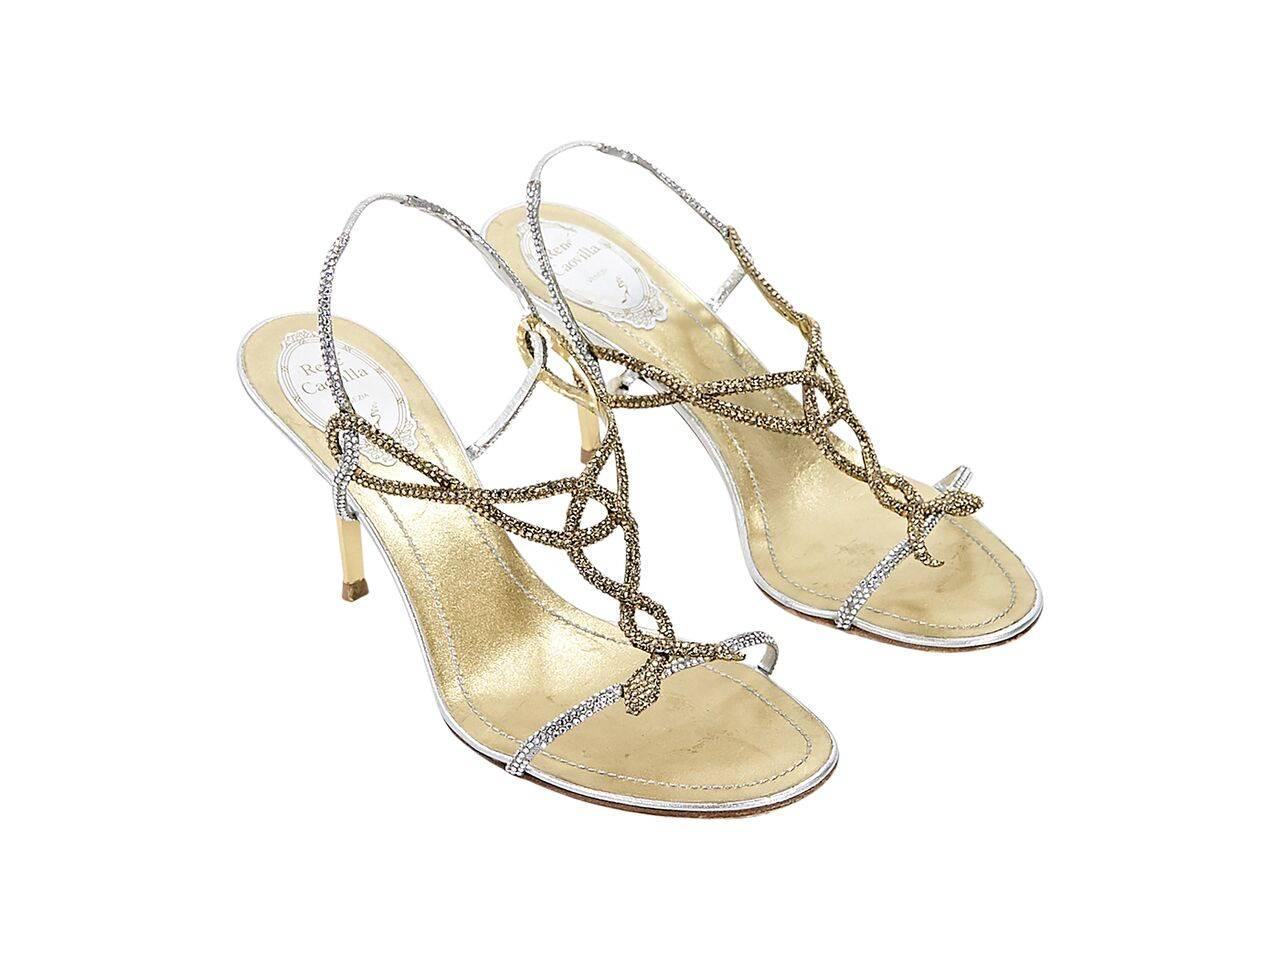 Product details:  Metallic silver and gold embellished evening sandals by René Caovilla.  Slingback strap with inset elastic panel.  Open toe. 
Condition: Pre-owned. Very good.
Est. Retail $ 698.00